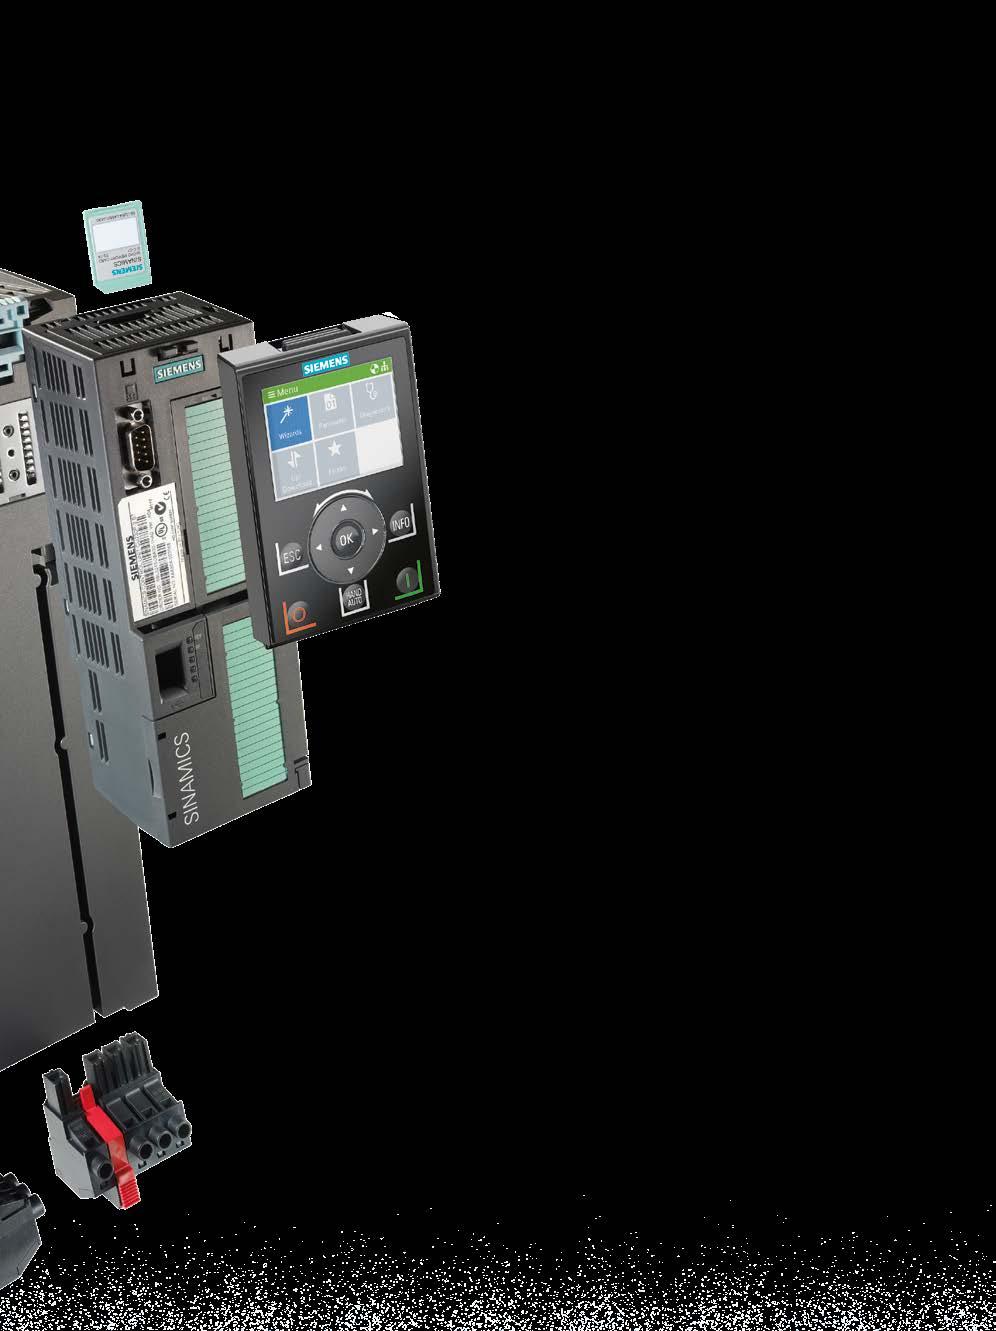 No add-ons required meets all relevant standards The G120P is available with integrated EMC filters of class A or B and is designed to comply with CE and RCM, as well as all applicable EN standards.